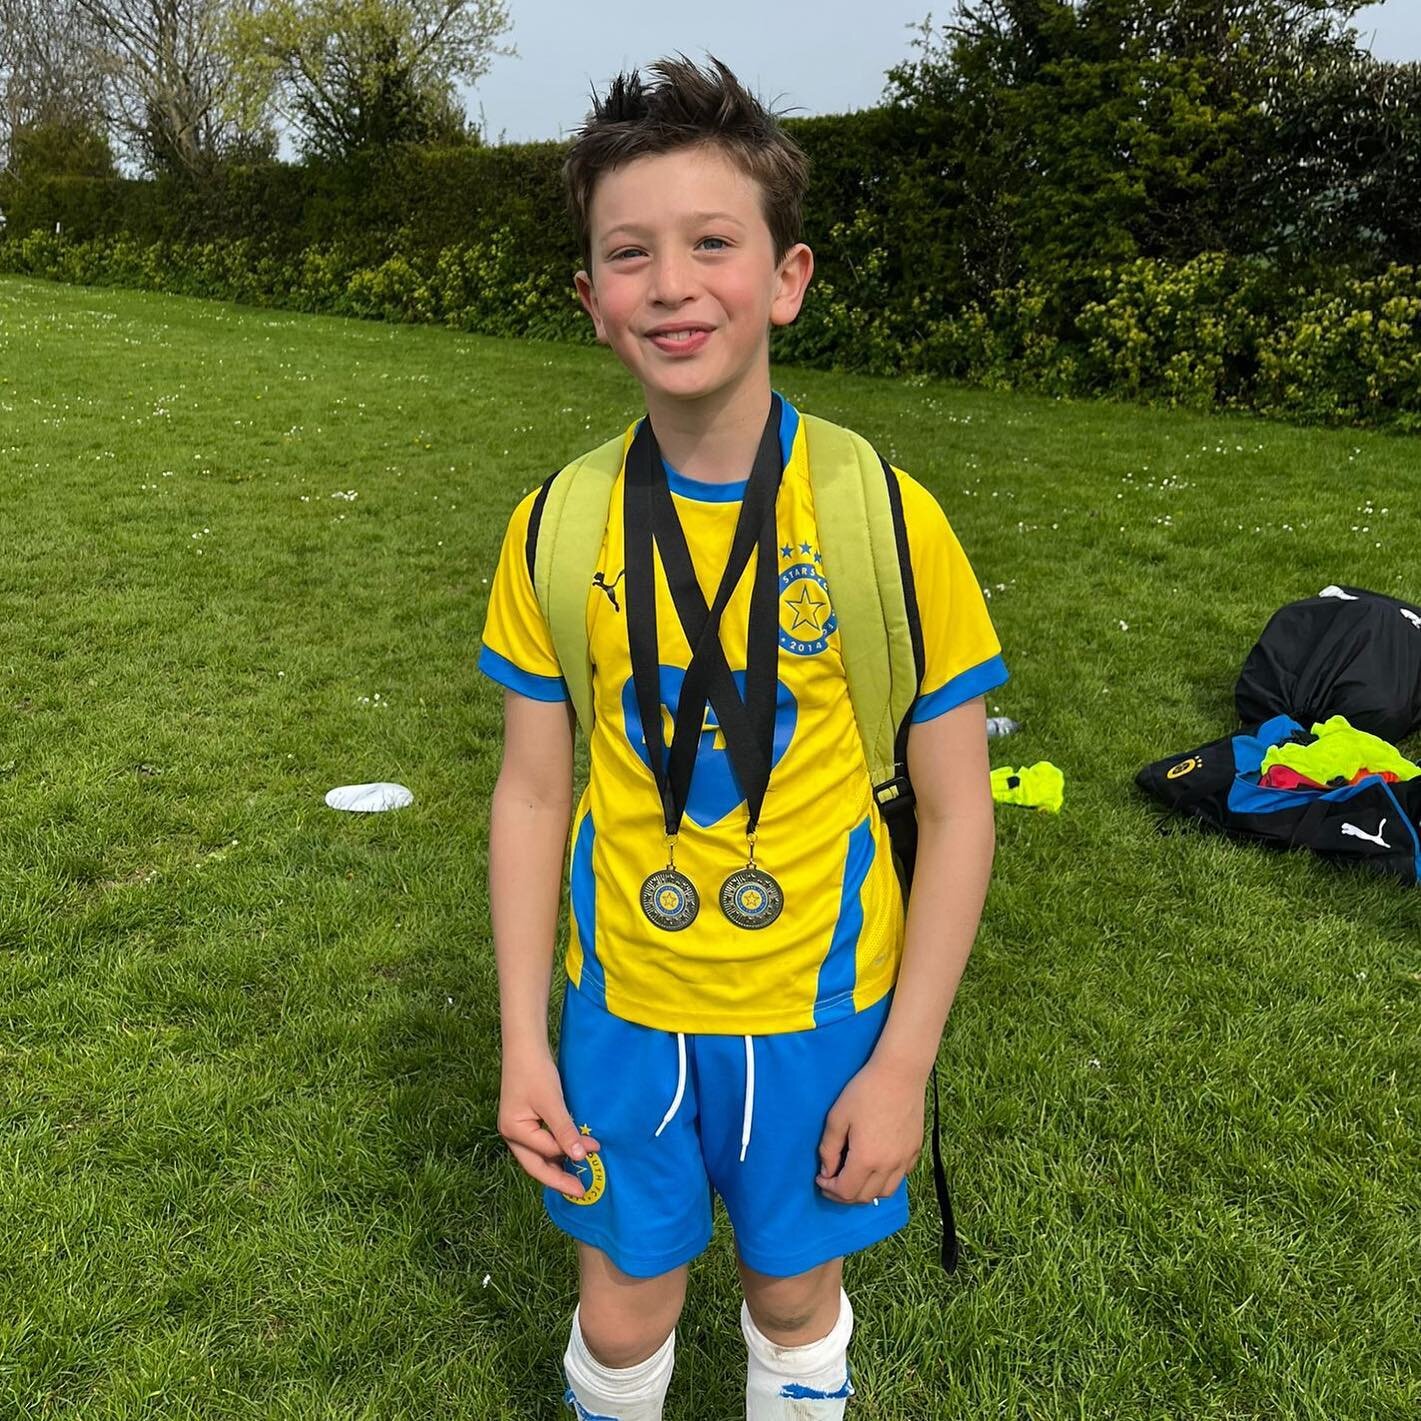 Risers U11 Yellows travelled to St Margaret&rsquo;s for a friendly in the sun yesterday.  Great teamwork all round and some lovely worked goals 👏🏻⚽️☀️

Player of the match as voted by parents went to Ruben for 2 well taken goals and great teamwork 